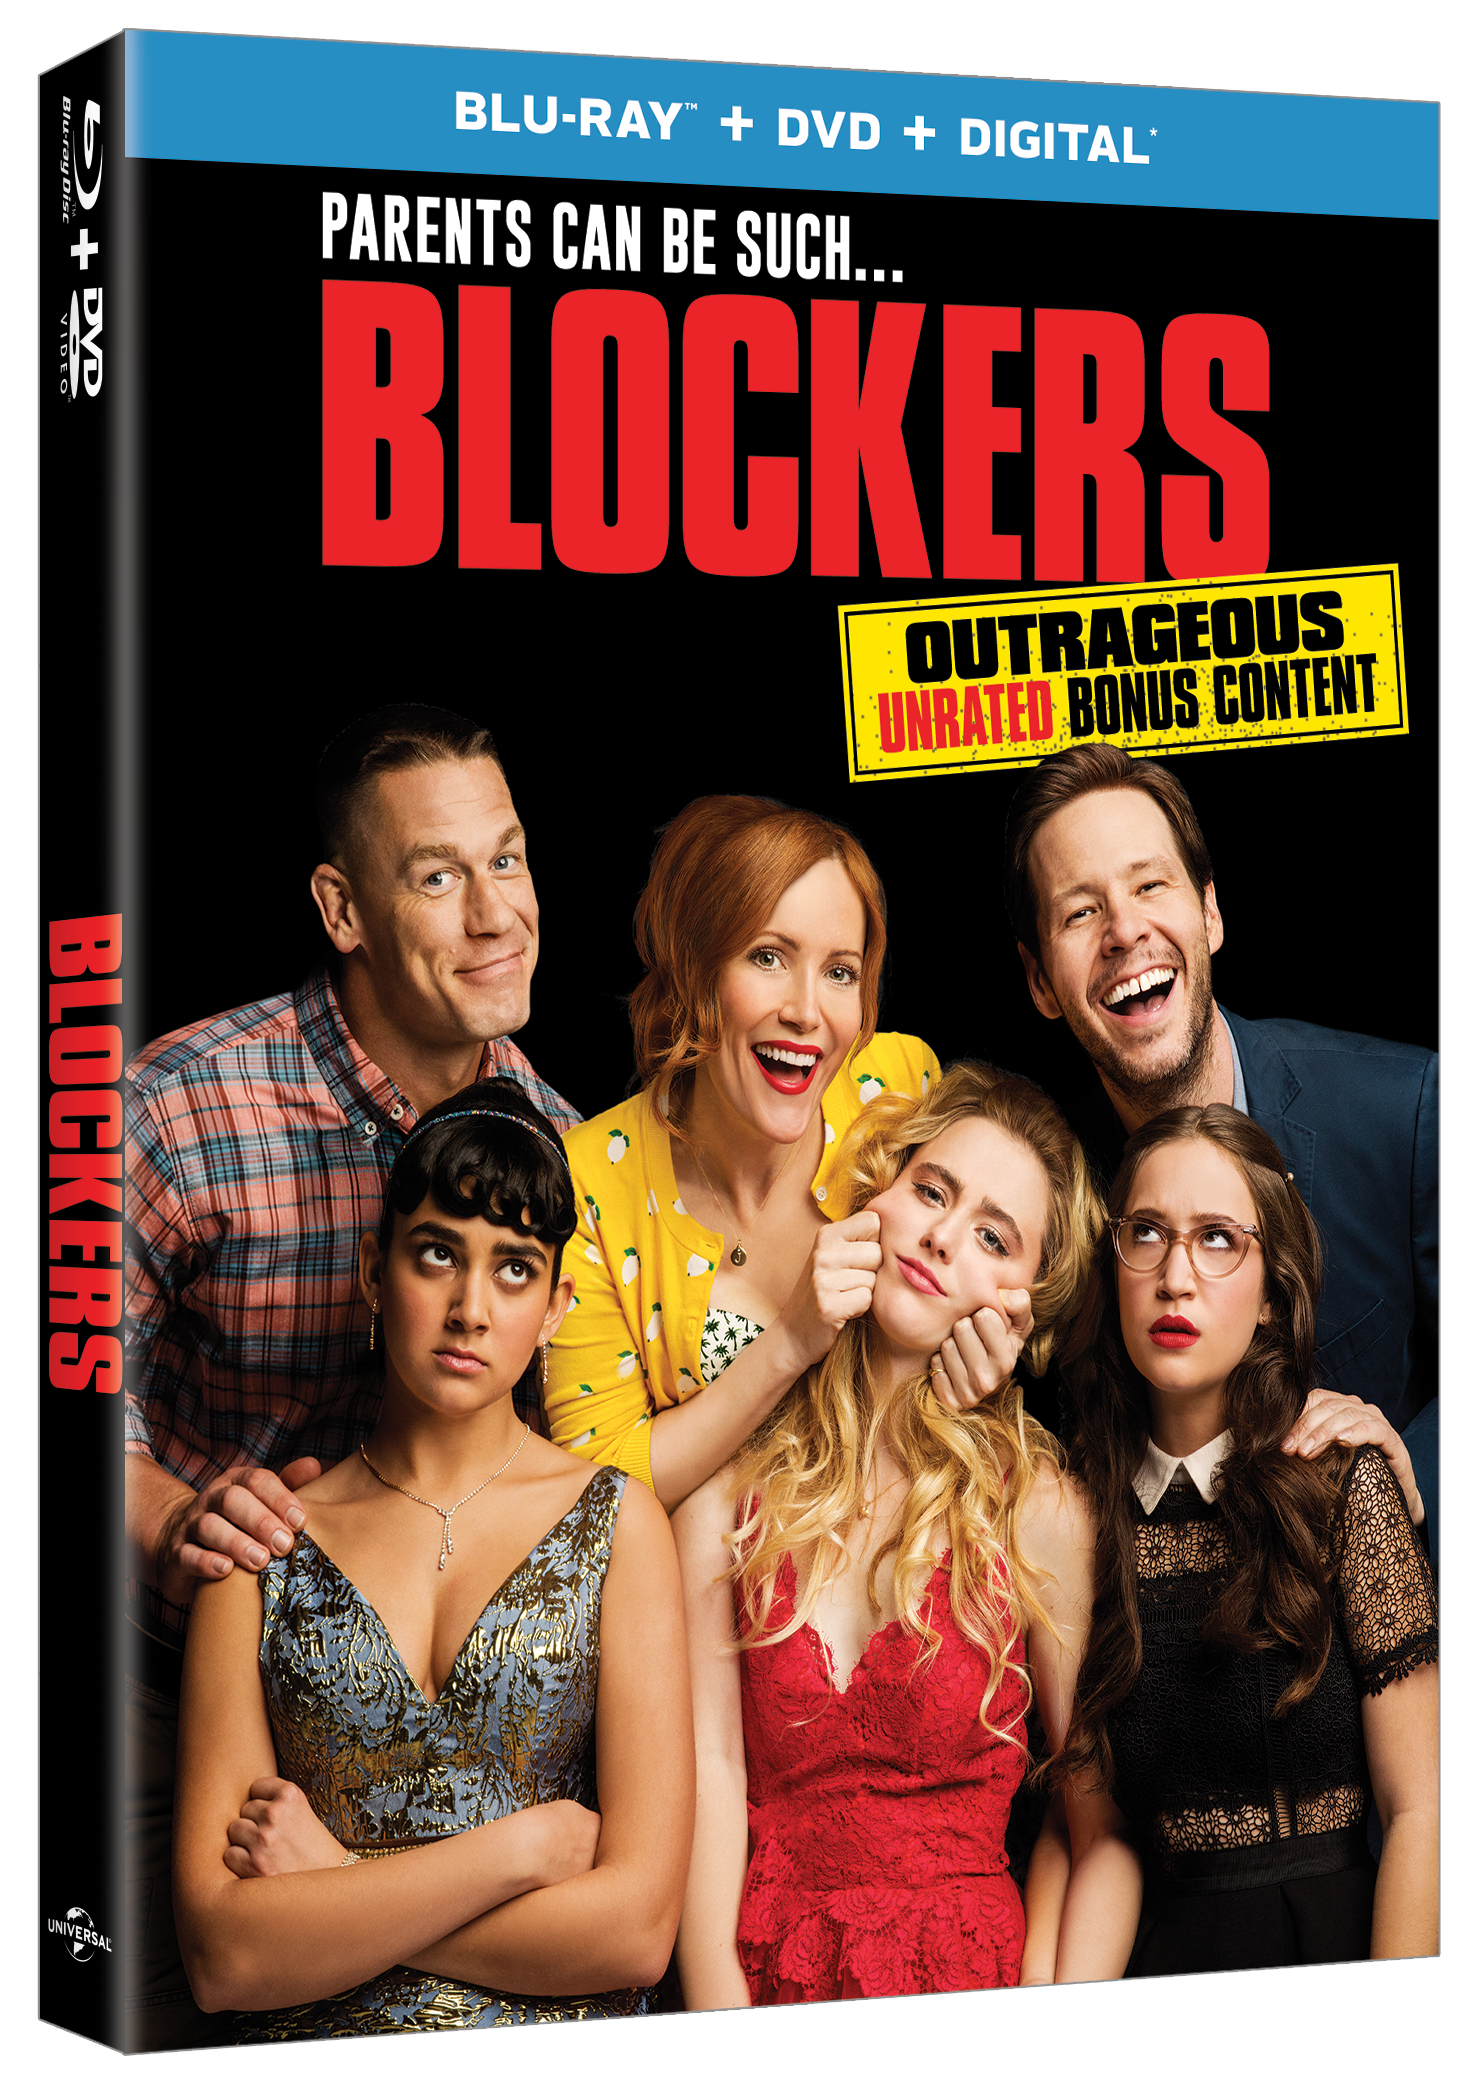 Blockers Universal Pictures Home Entertainment Blu-ray DVD Digital release